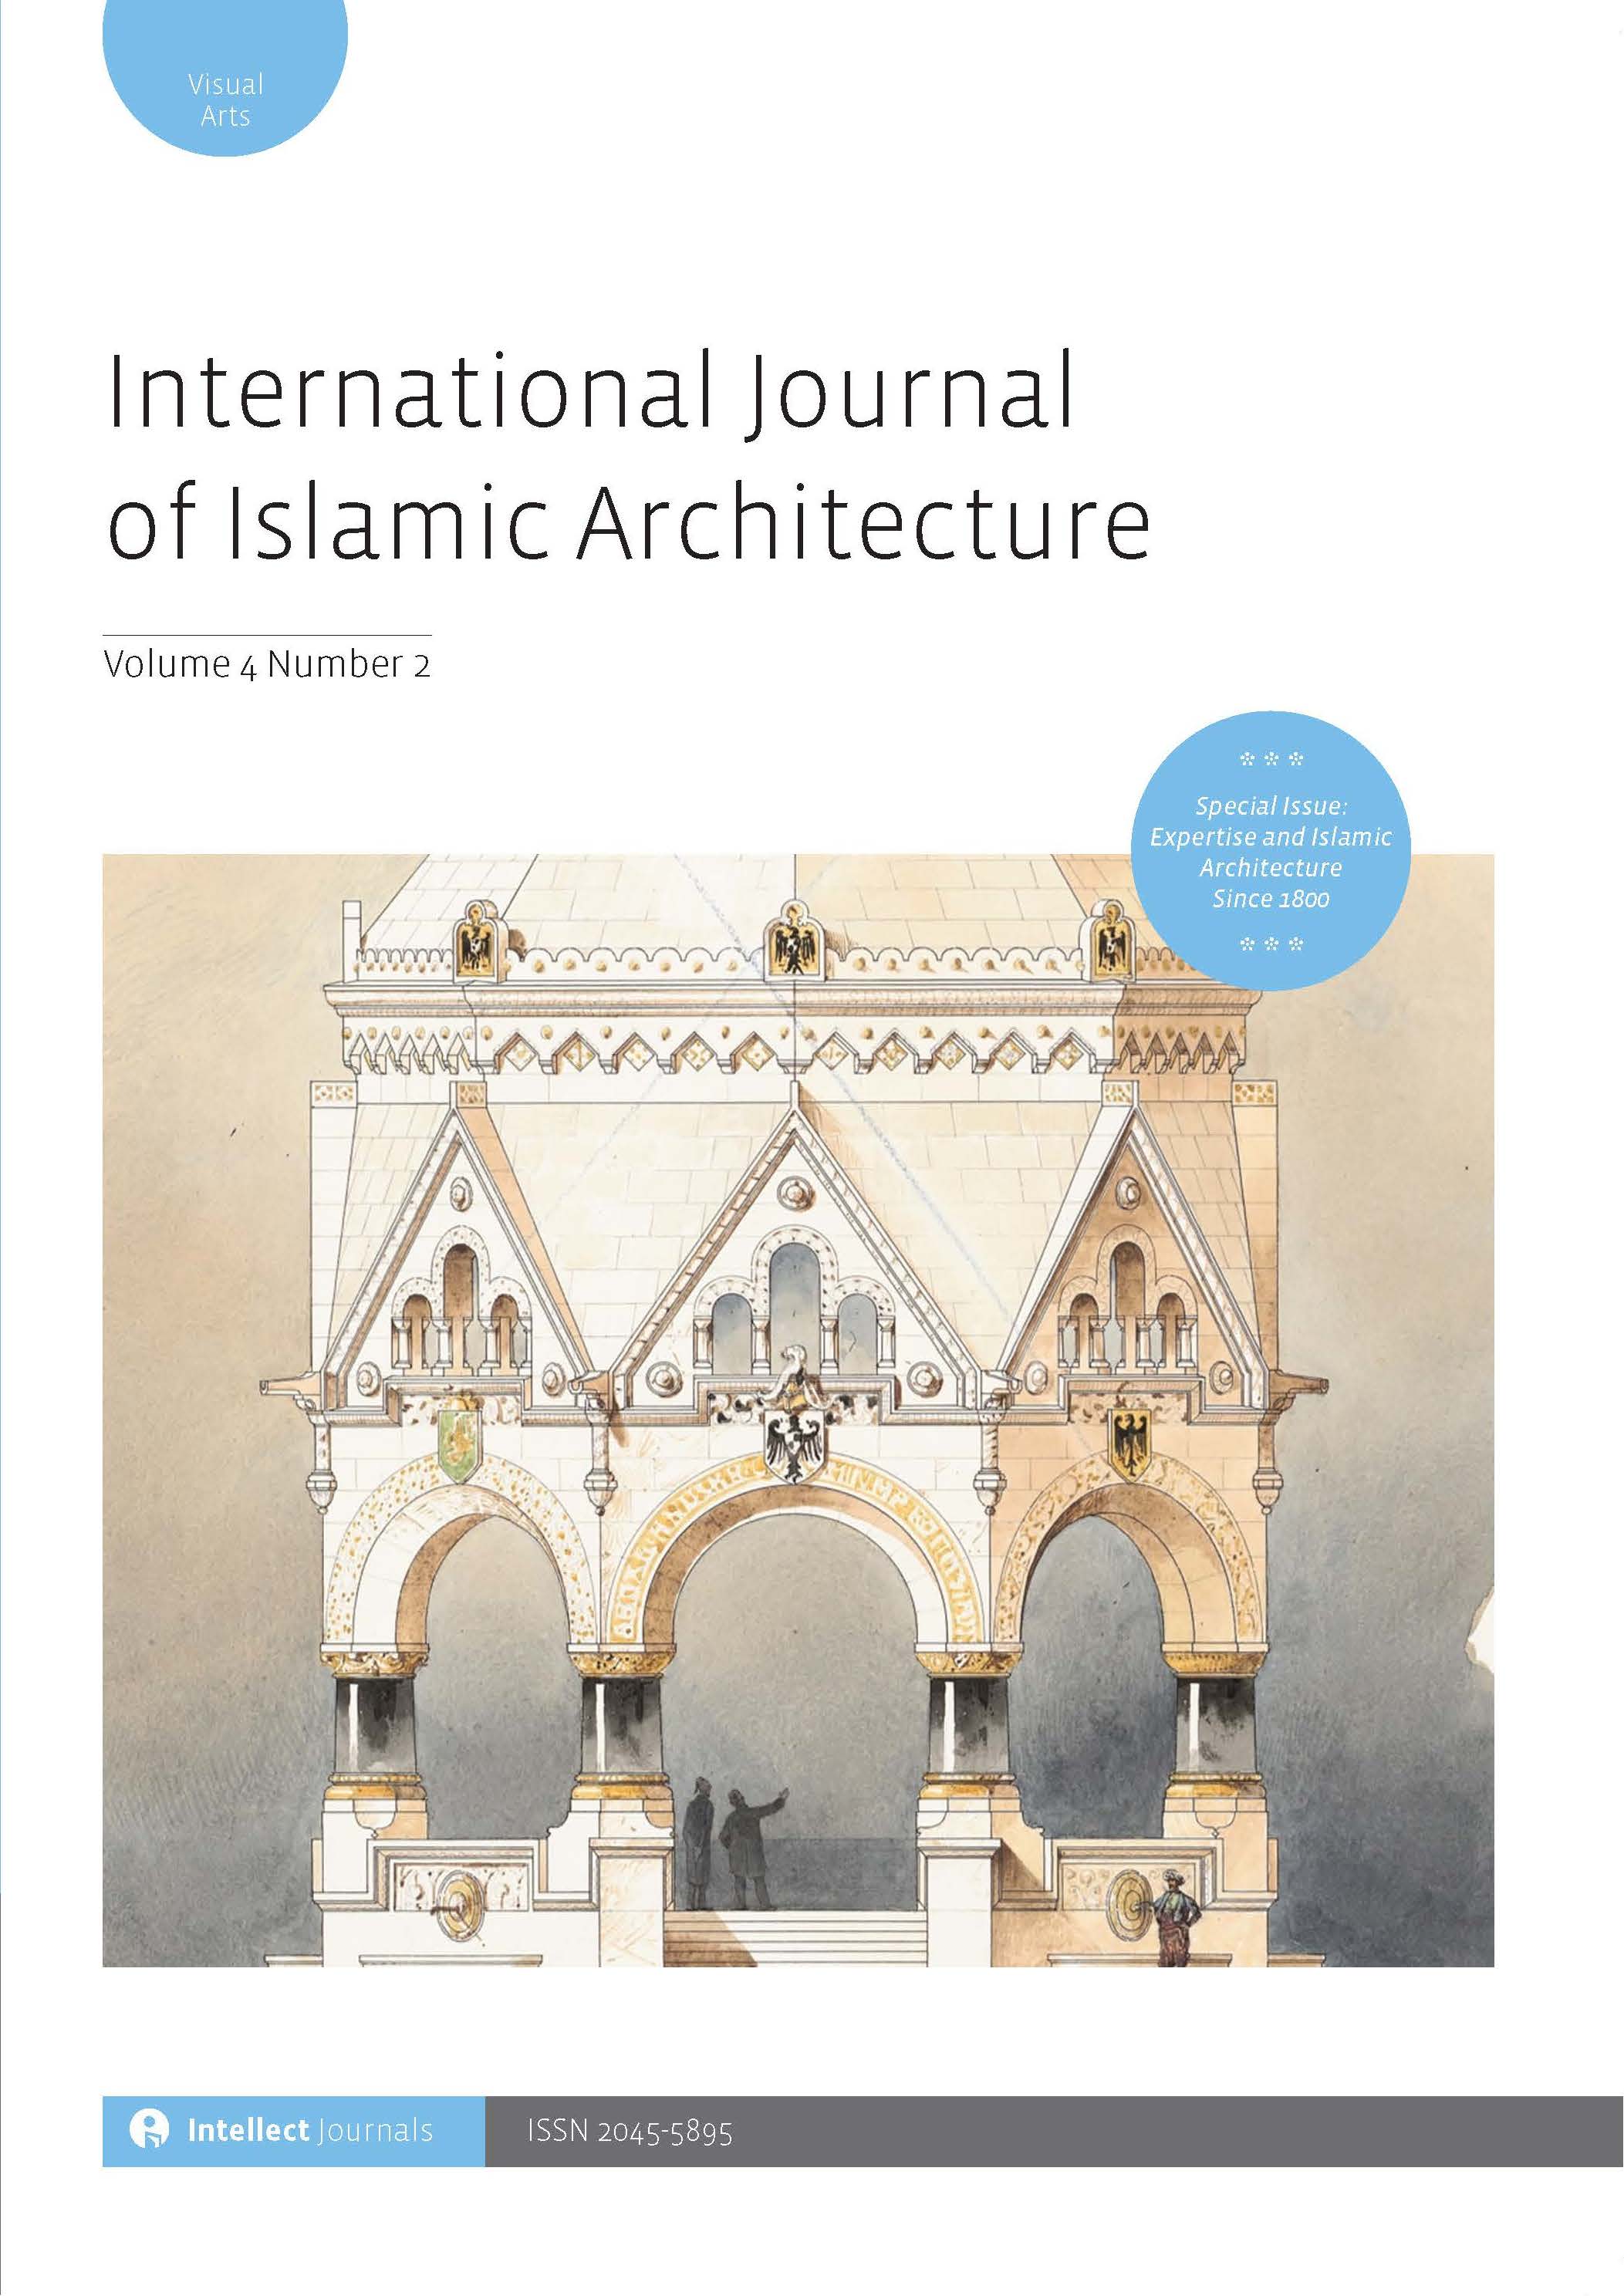 Expertise and the Economies of Knowledge of Architectural Practice in the Islamic World since 1800